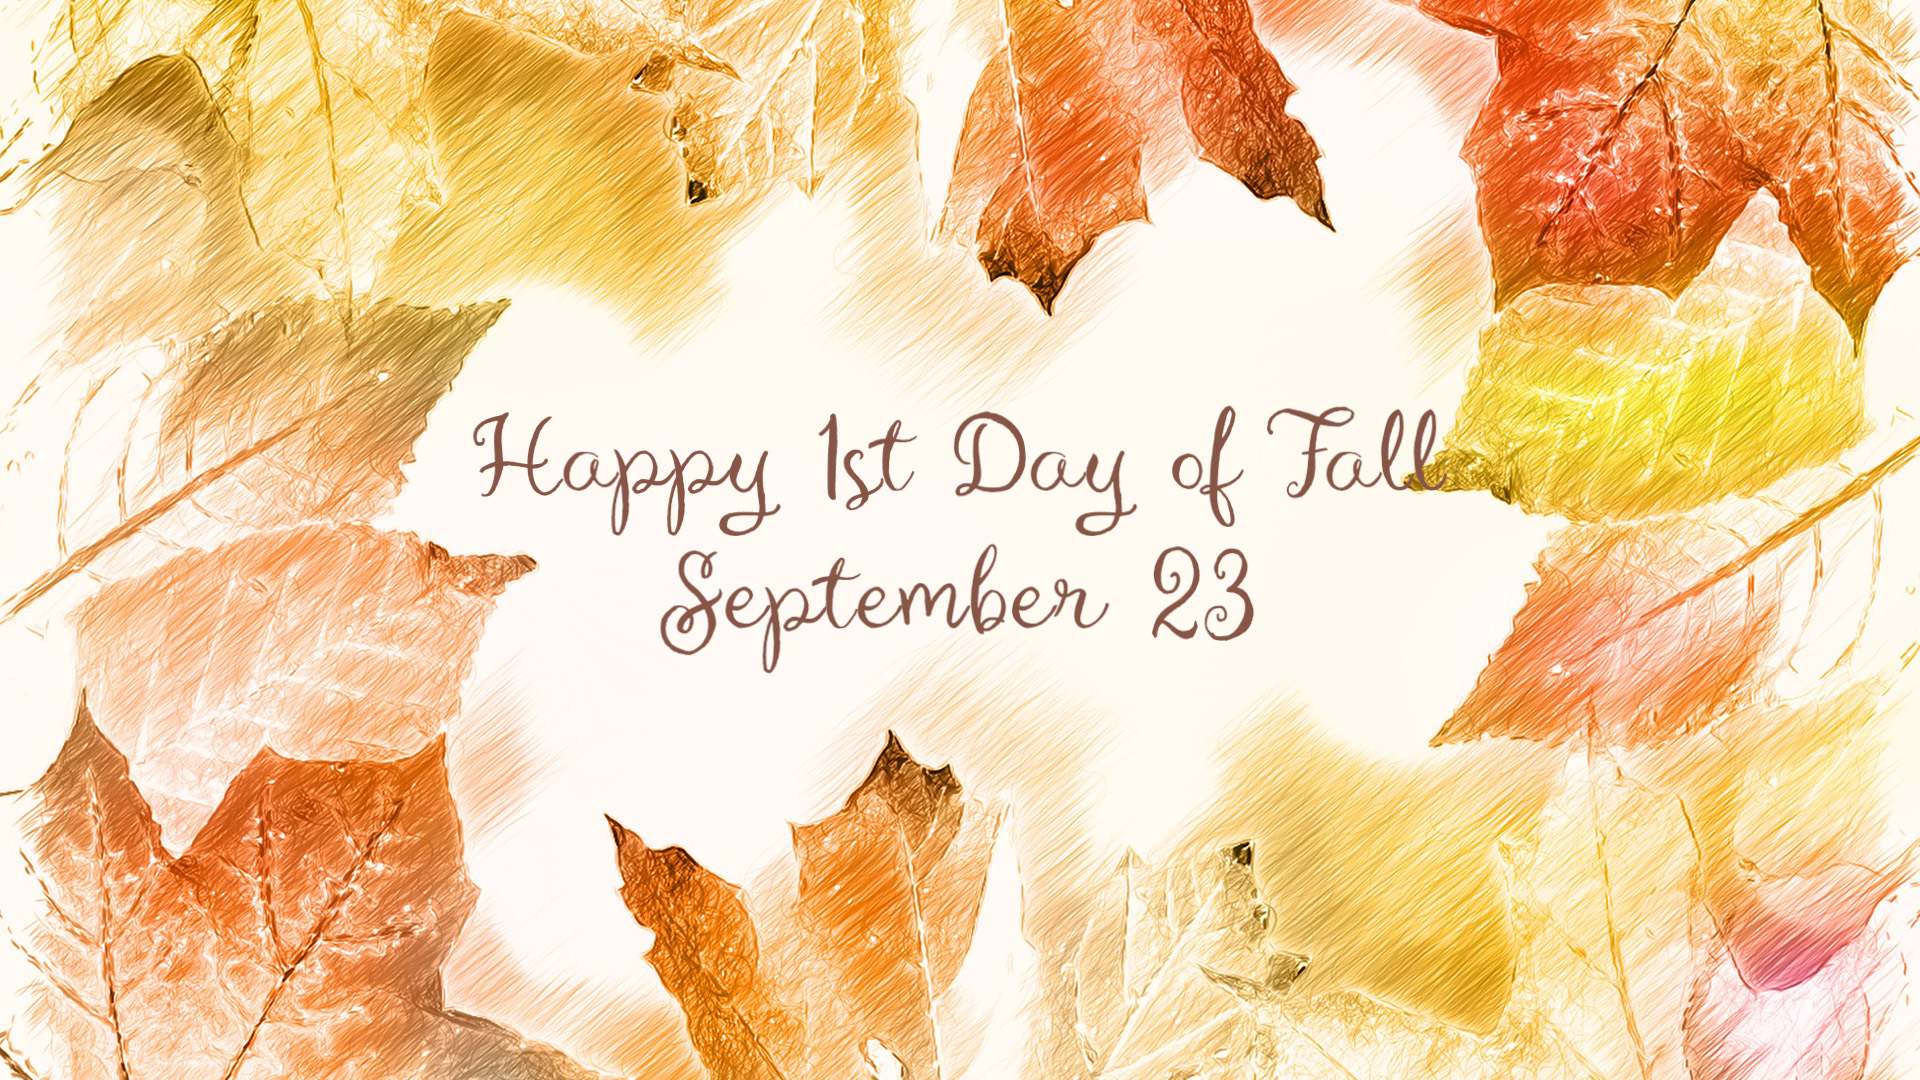 Pencil drawings of orange and yellow fall and autumn leaves overlap and frame all the edges on a white background. In the center it reads Happy 1st Day of Fall September 23 in brown script font.